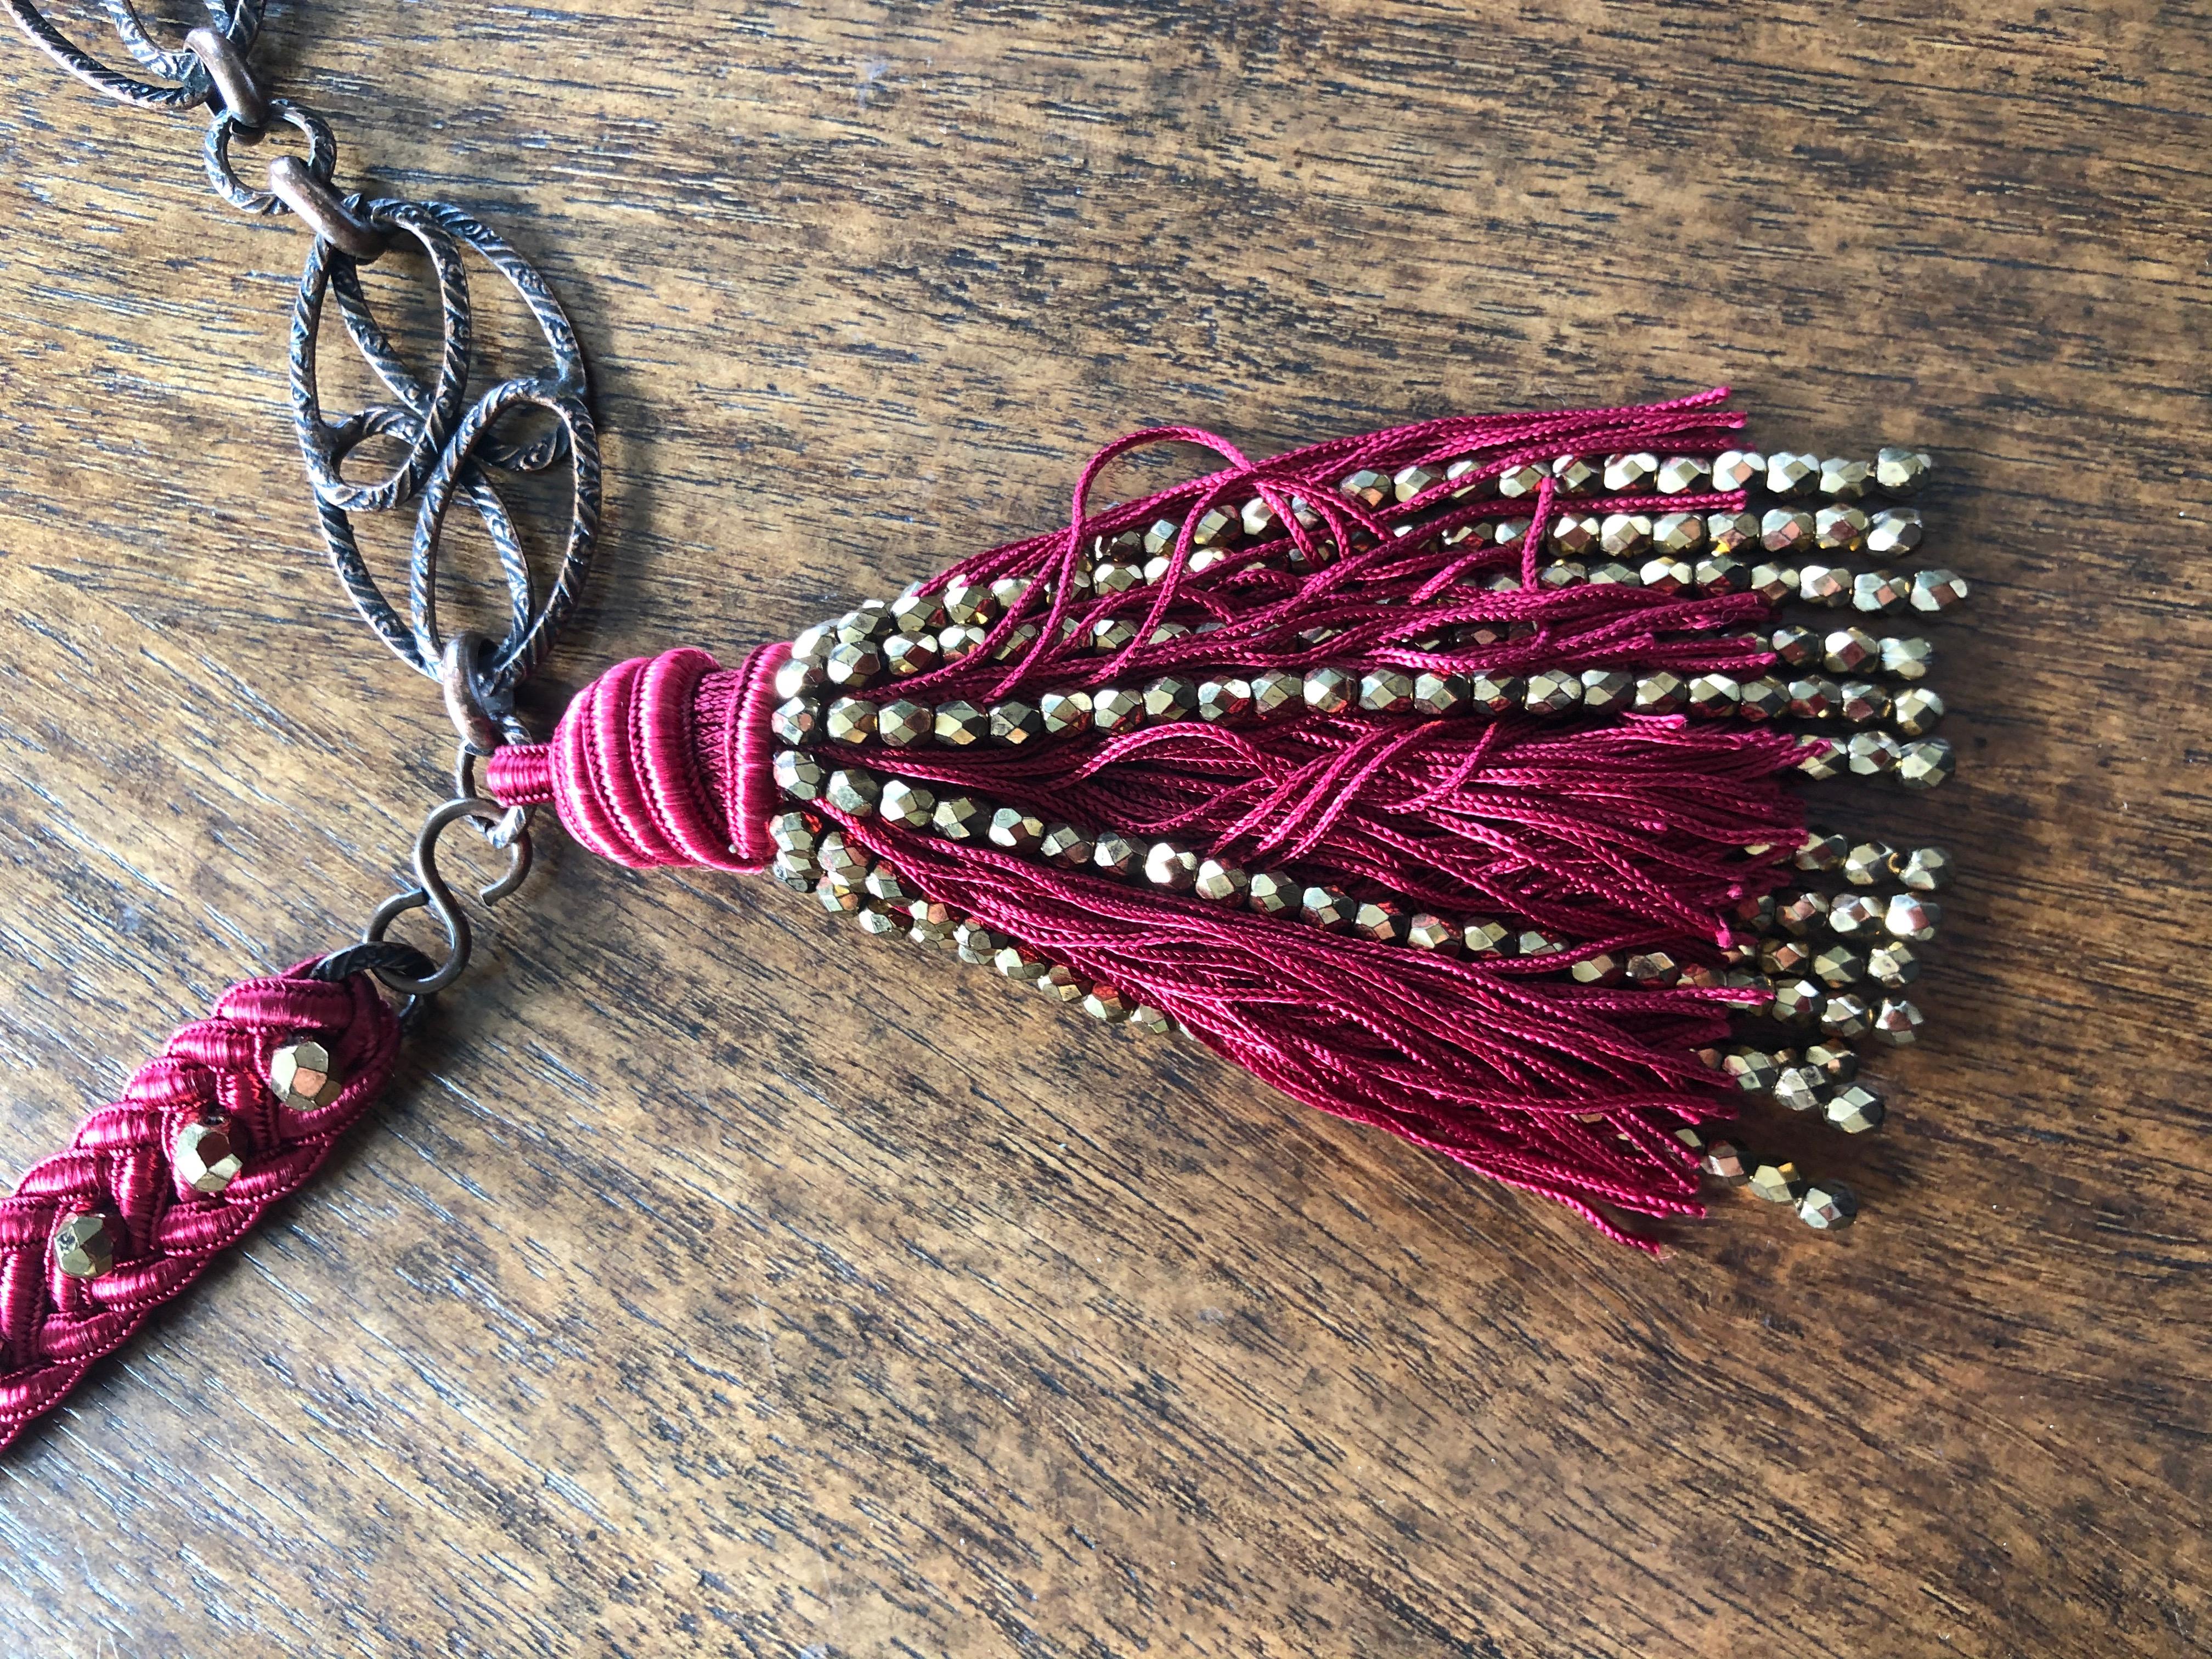 Purple Yves Saint Laurent Vintage 70's Red Cord Beaded Belt with Chain Links and Tassel For Sale